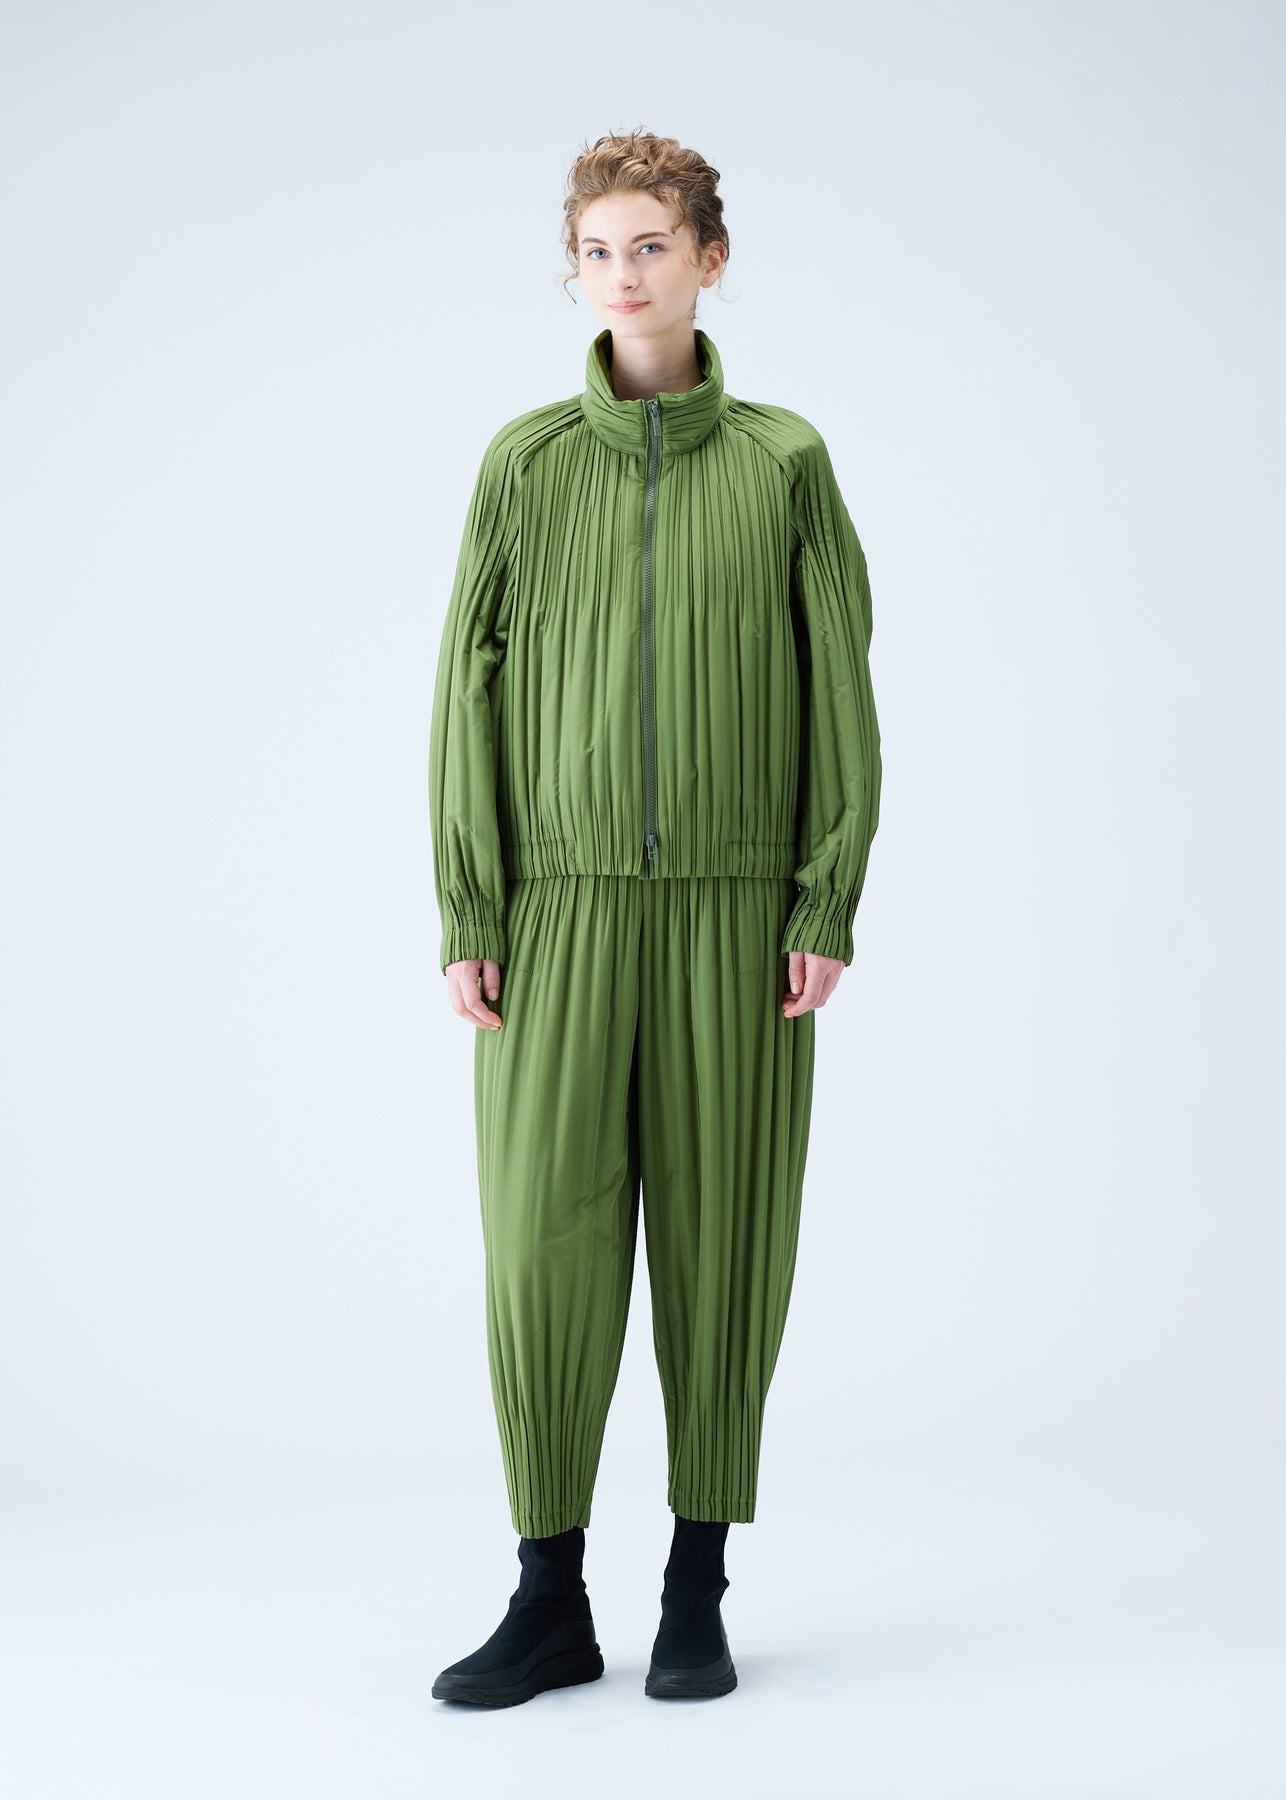 Homme Plissé Issey Miyake Men's Pleated Trousers